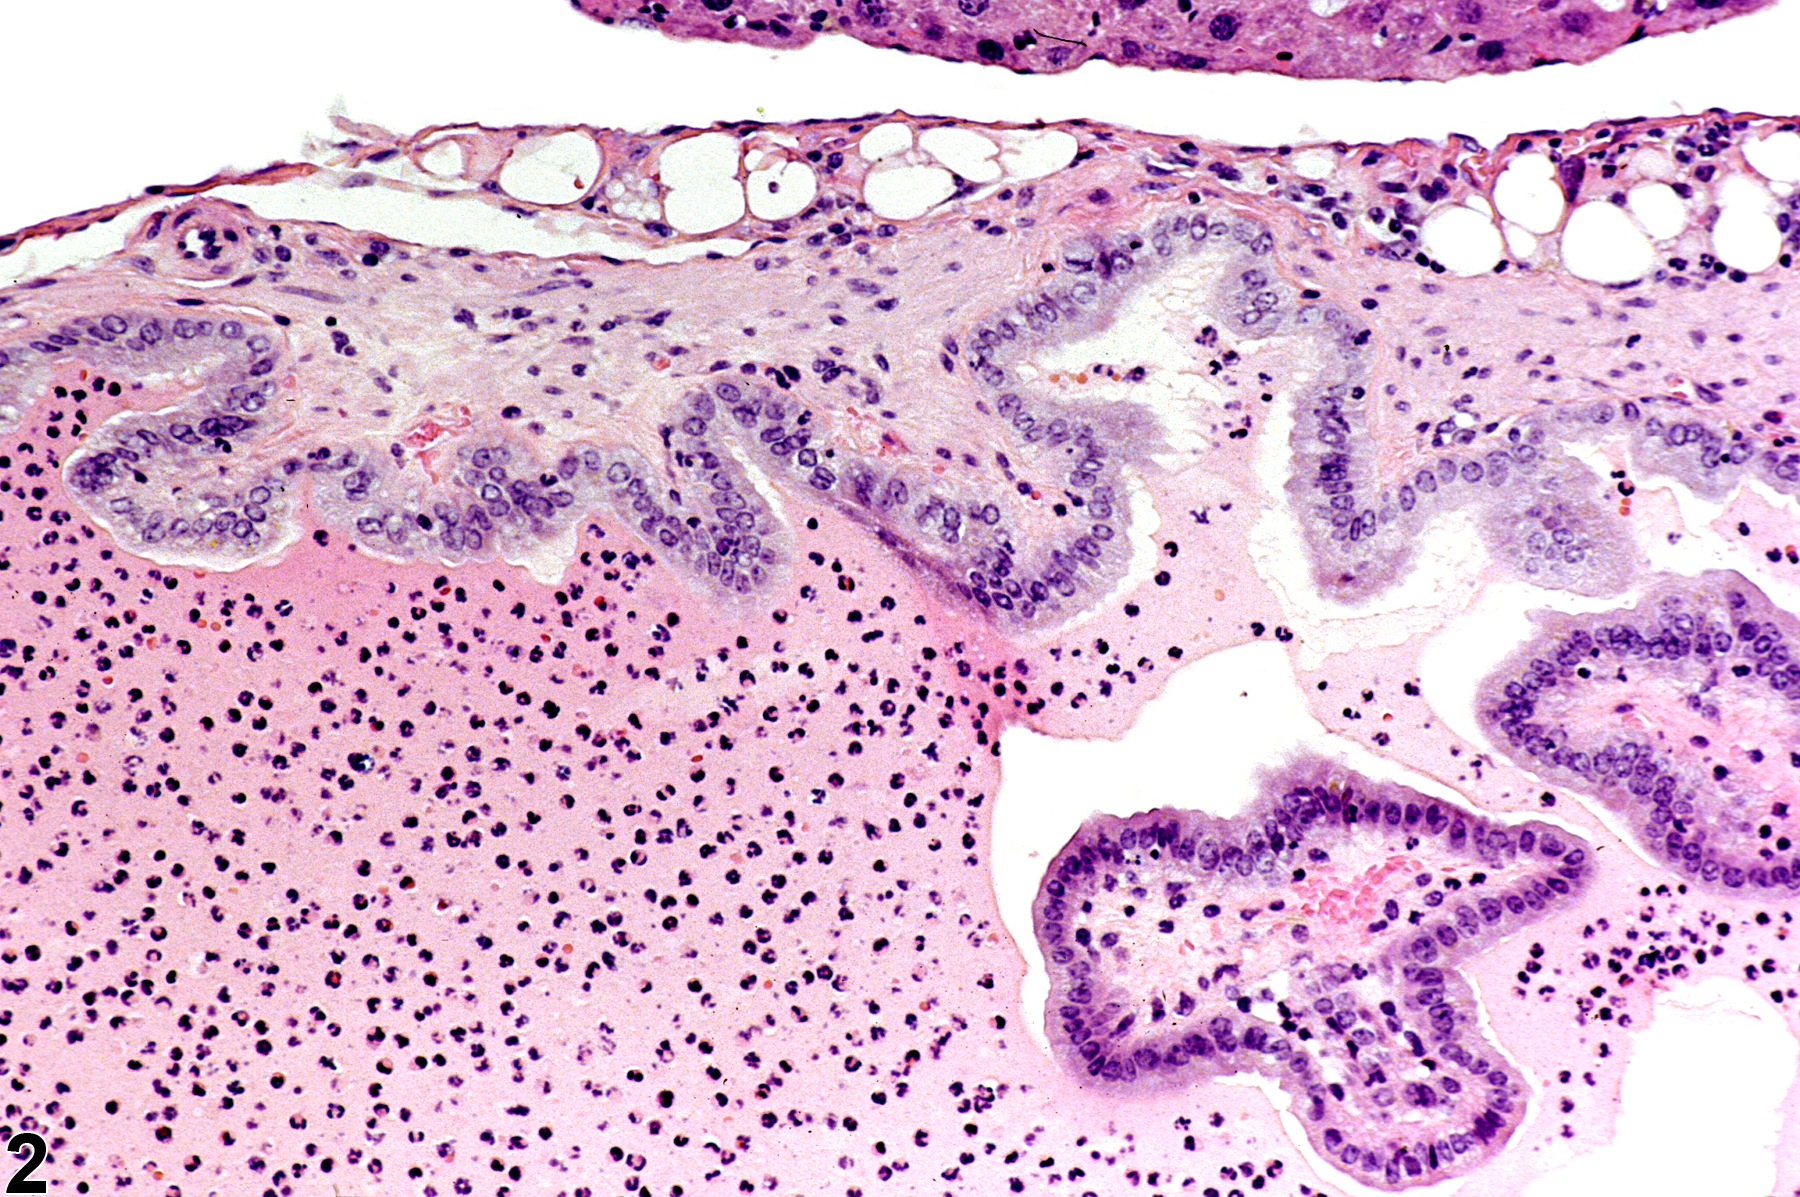 Image of inflammation in the gallbladder from a female B6C3F1 mouse in a chronic study